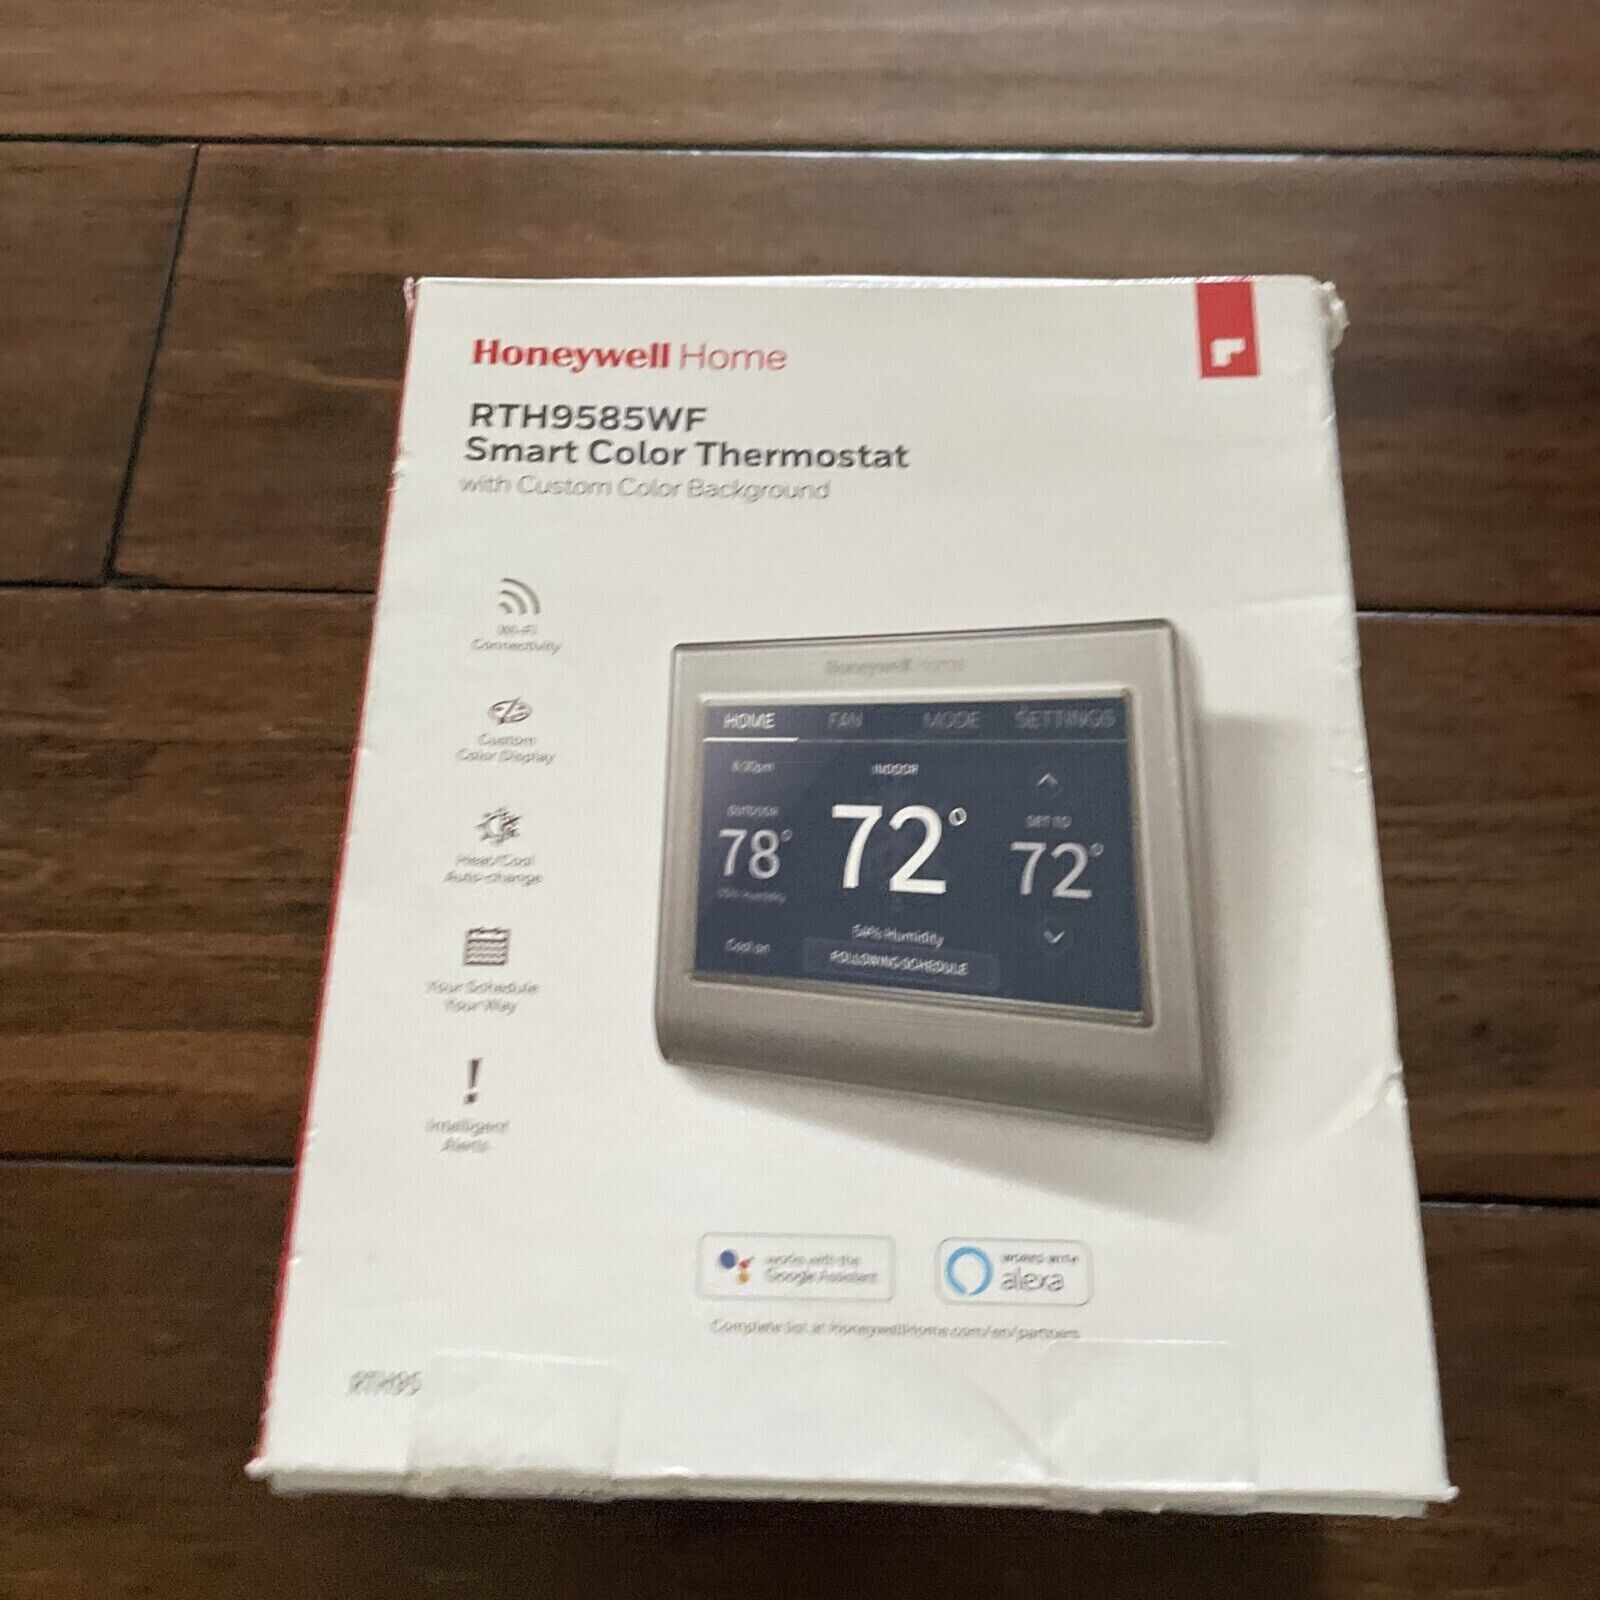 Honeywell Home RTH9585WF Wi-Fi Smart Color Thermostat